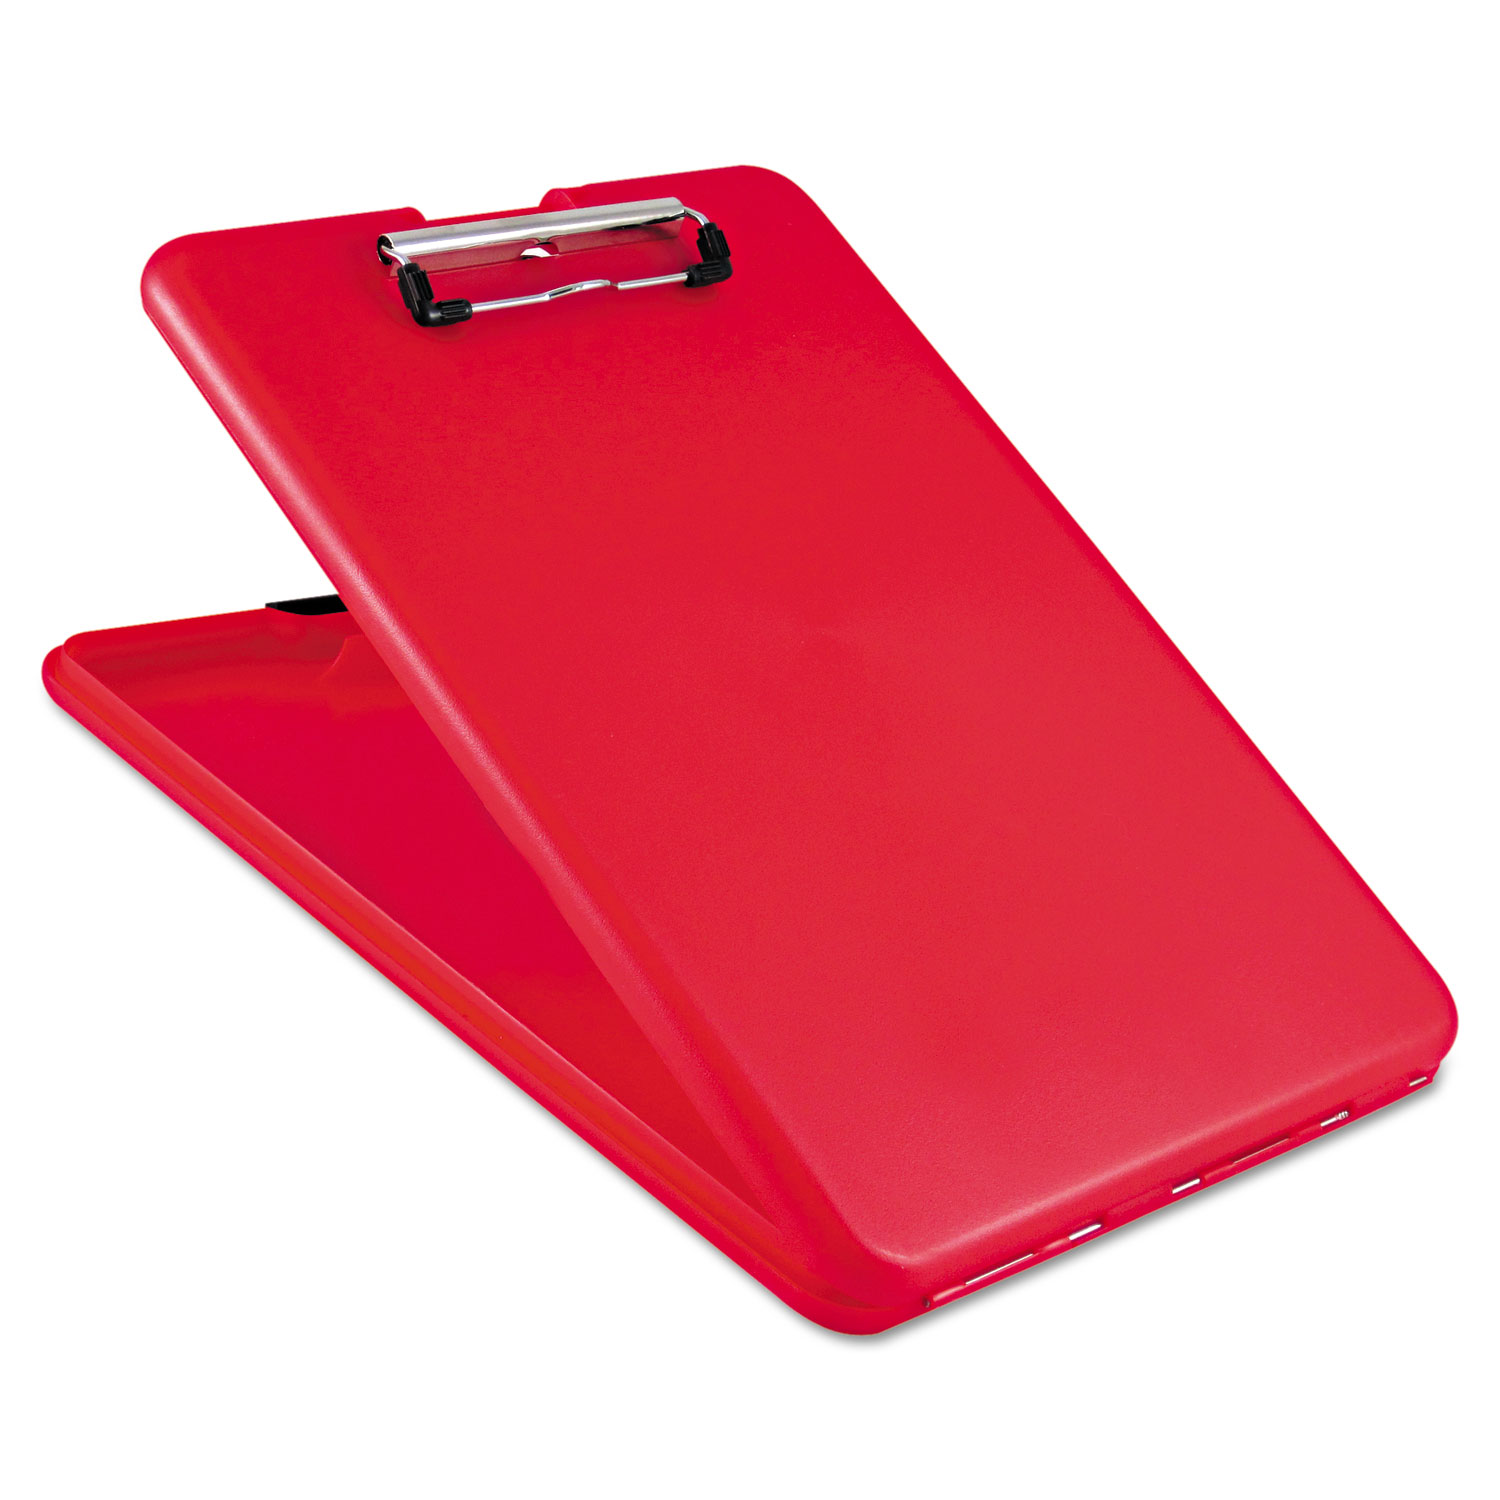 SlimMate Storage Clipboard, 1/2" Clip Capacity, Holds 8 1/2 x 11 Sheets, Red